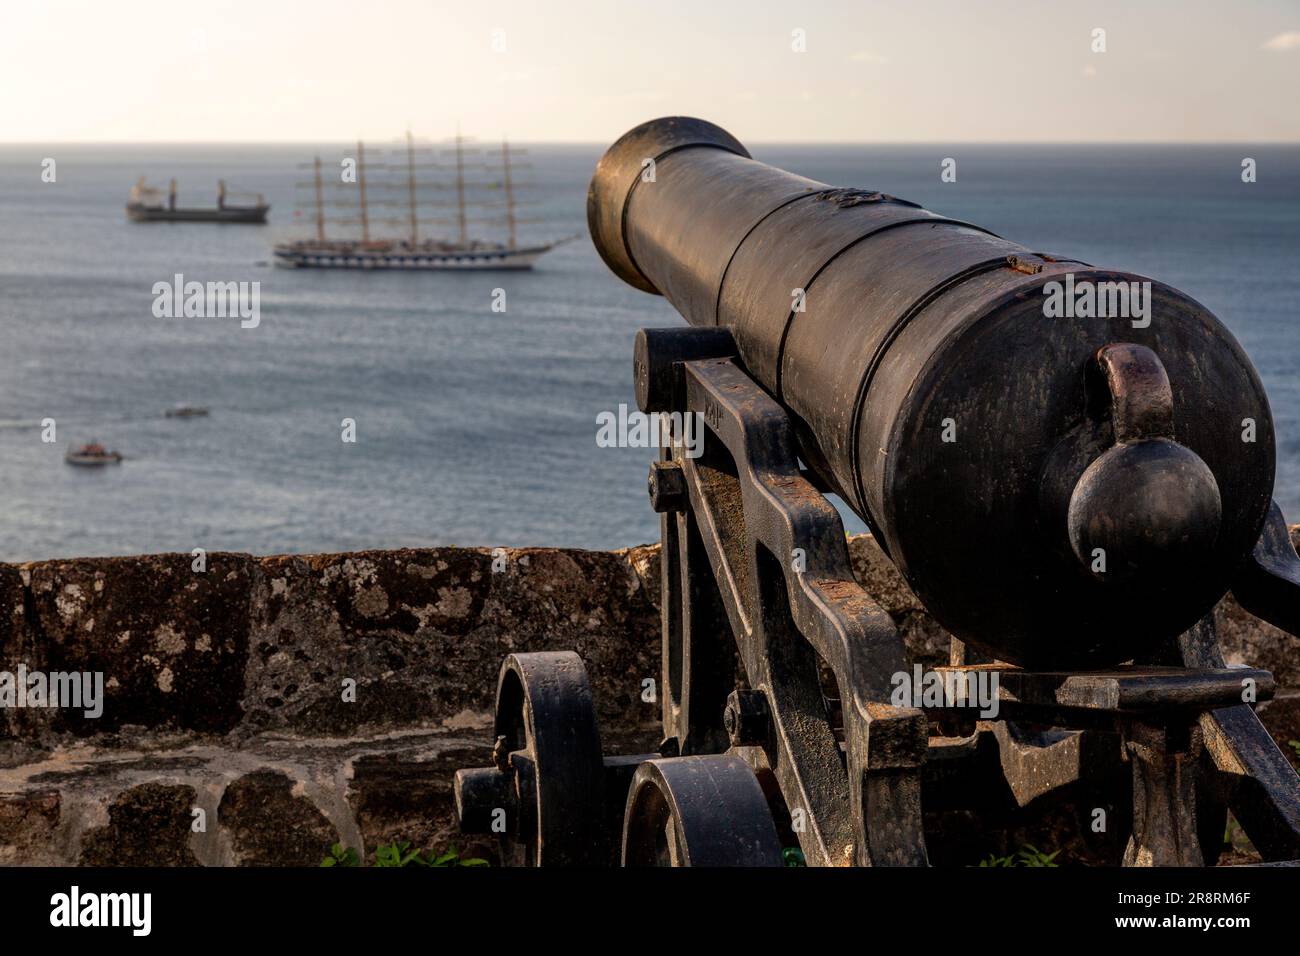 Cannon at Ft George overlooking the Caribbean Sea, St Georges, Grenada Stock Photo